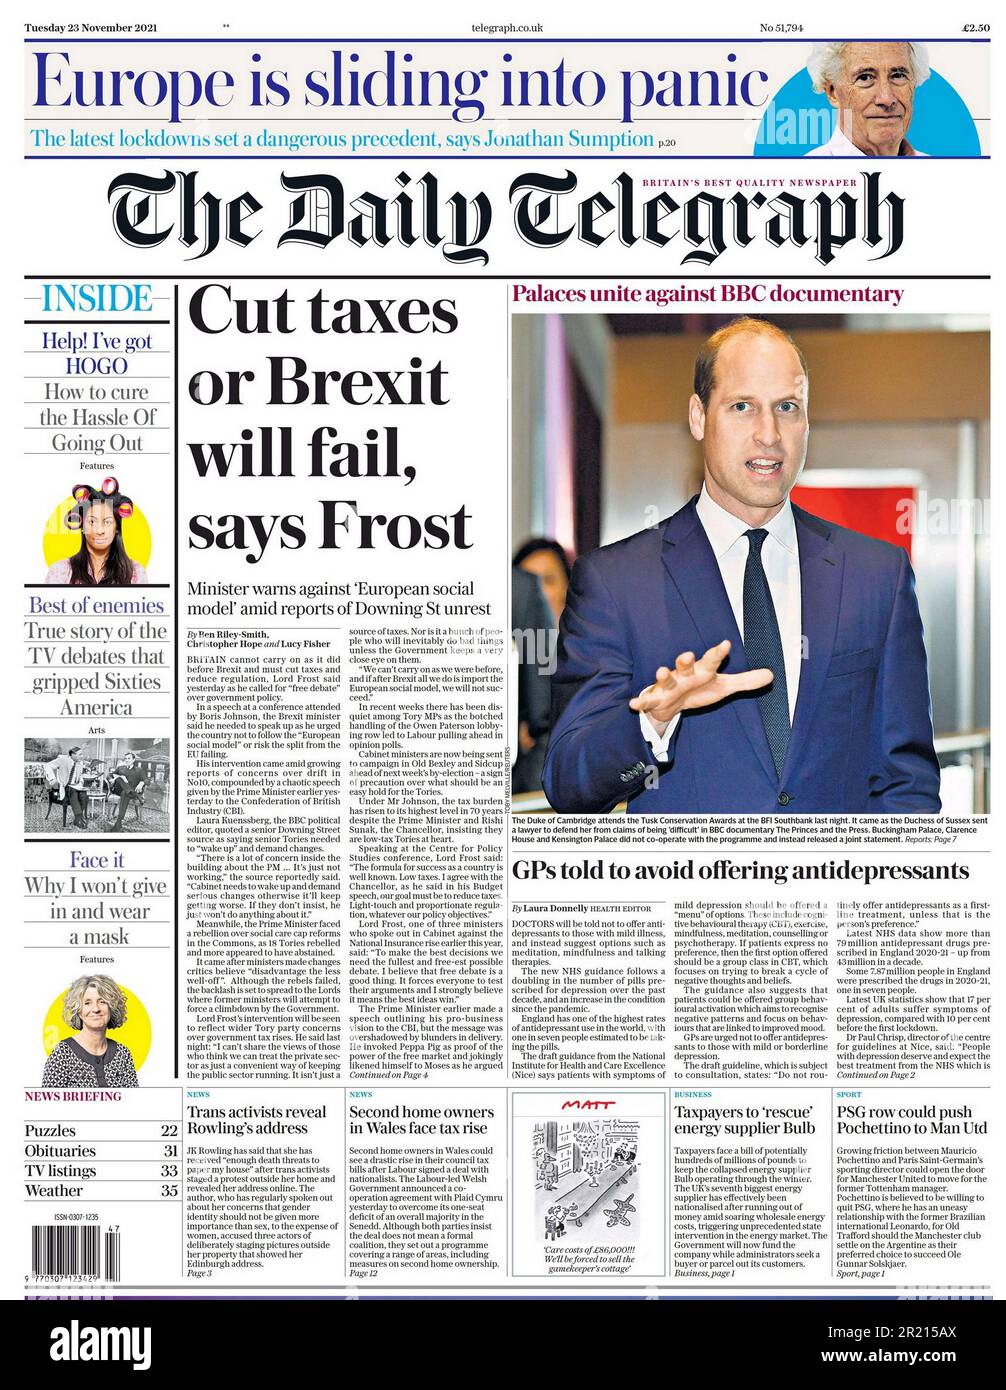 Daily Telegraph newspaper Headline (British), 2021. Cut taxes says Lord Frost or Brexit will fail November 2021 Stock Photo